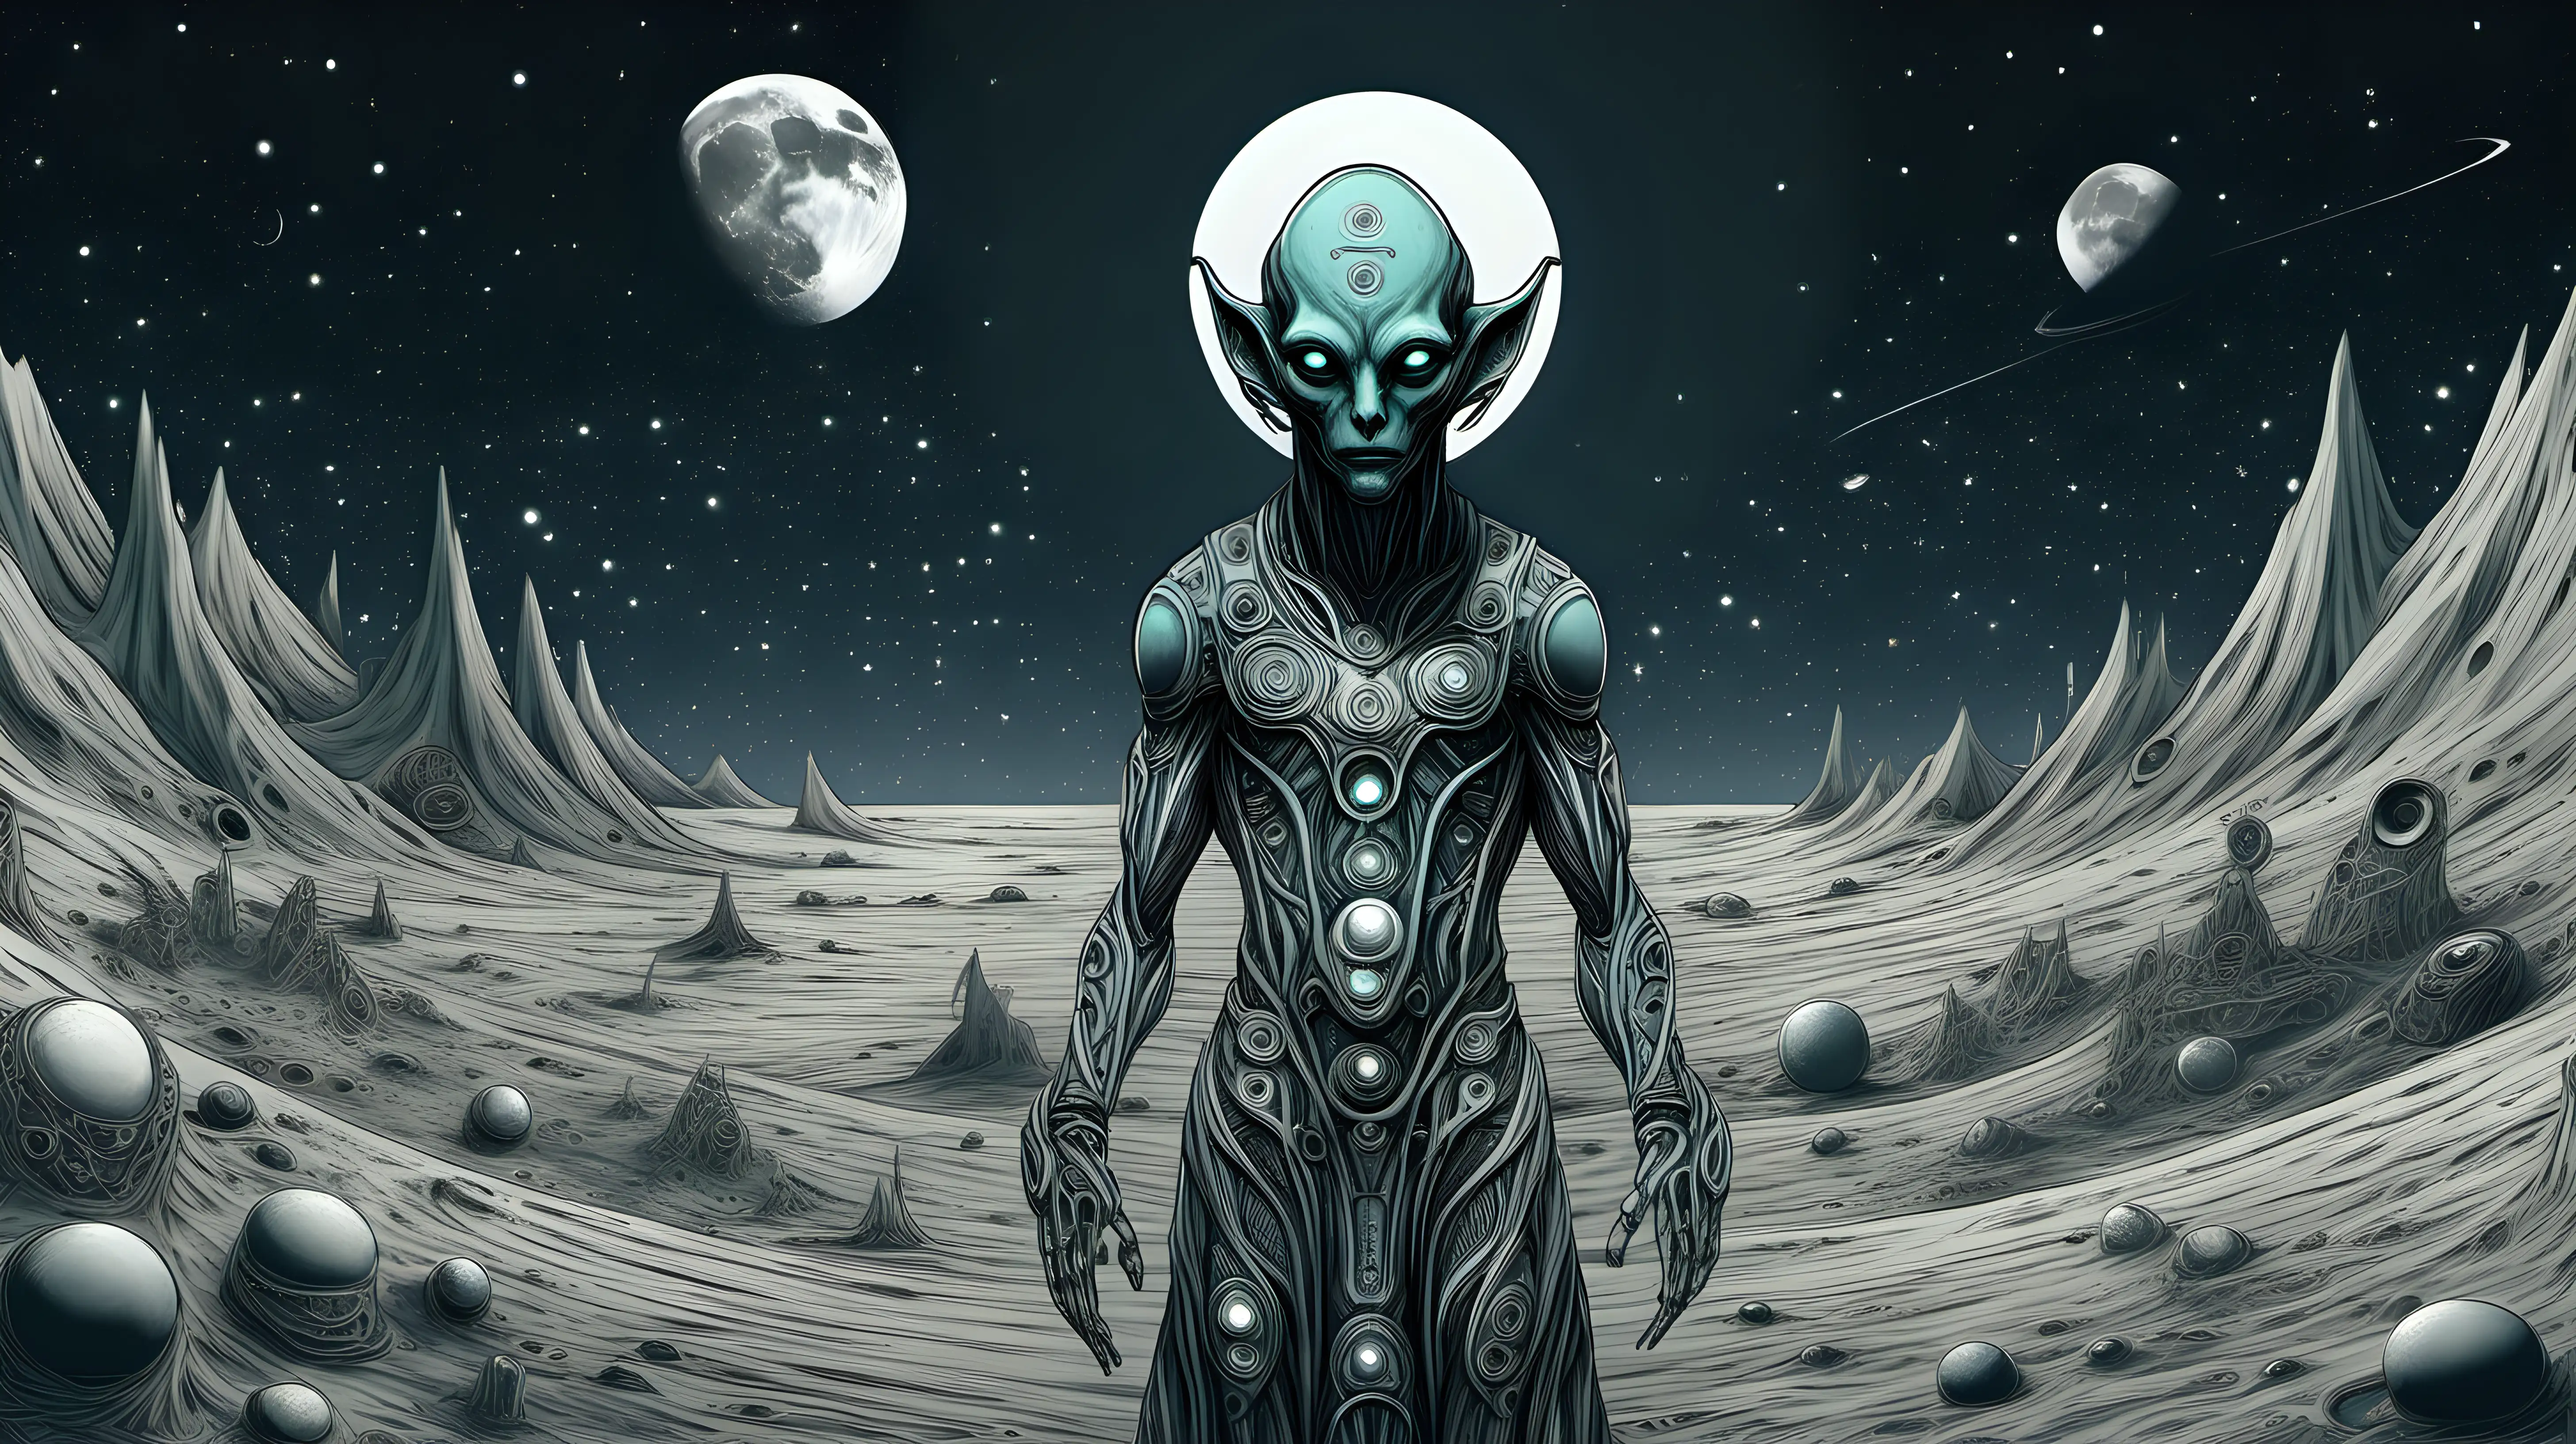 Design an image of a humanoid alien with a lunar-themed aesthetic, representing a species with an ancient history deeply tied to the moon, with lunar patterns integrated into their clothing and features